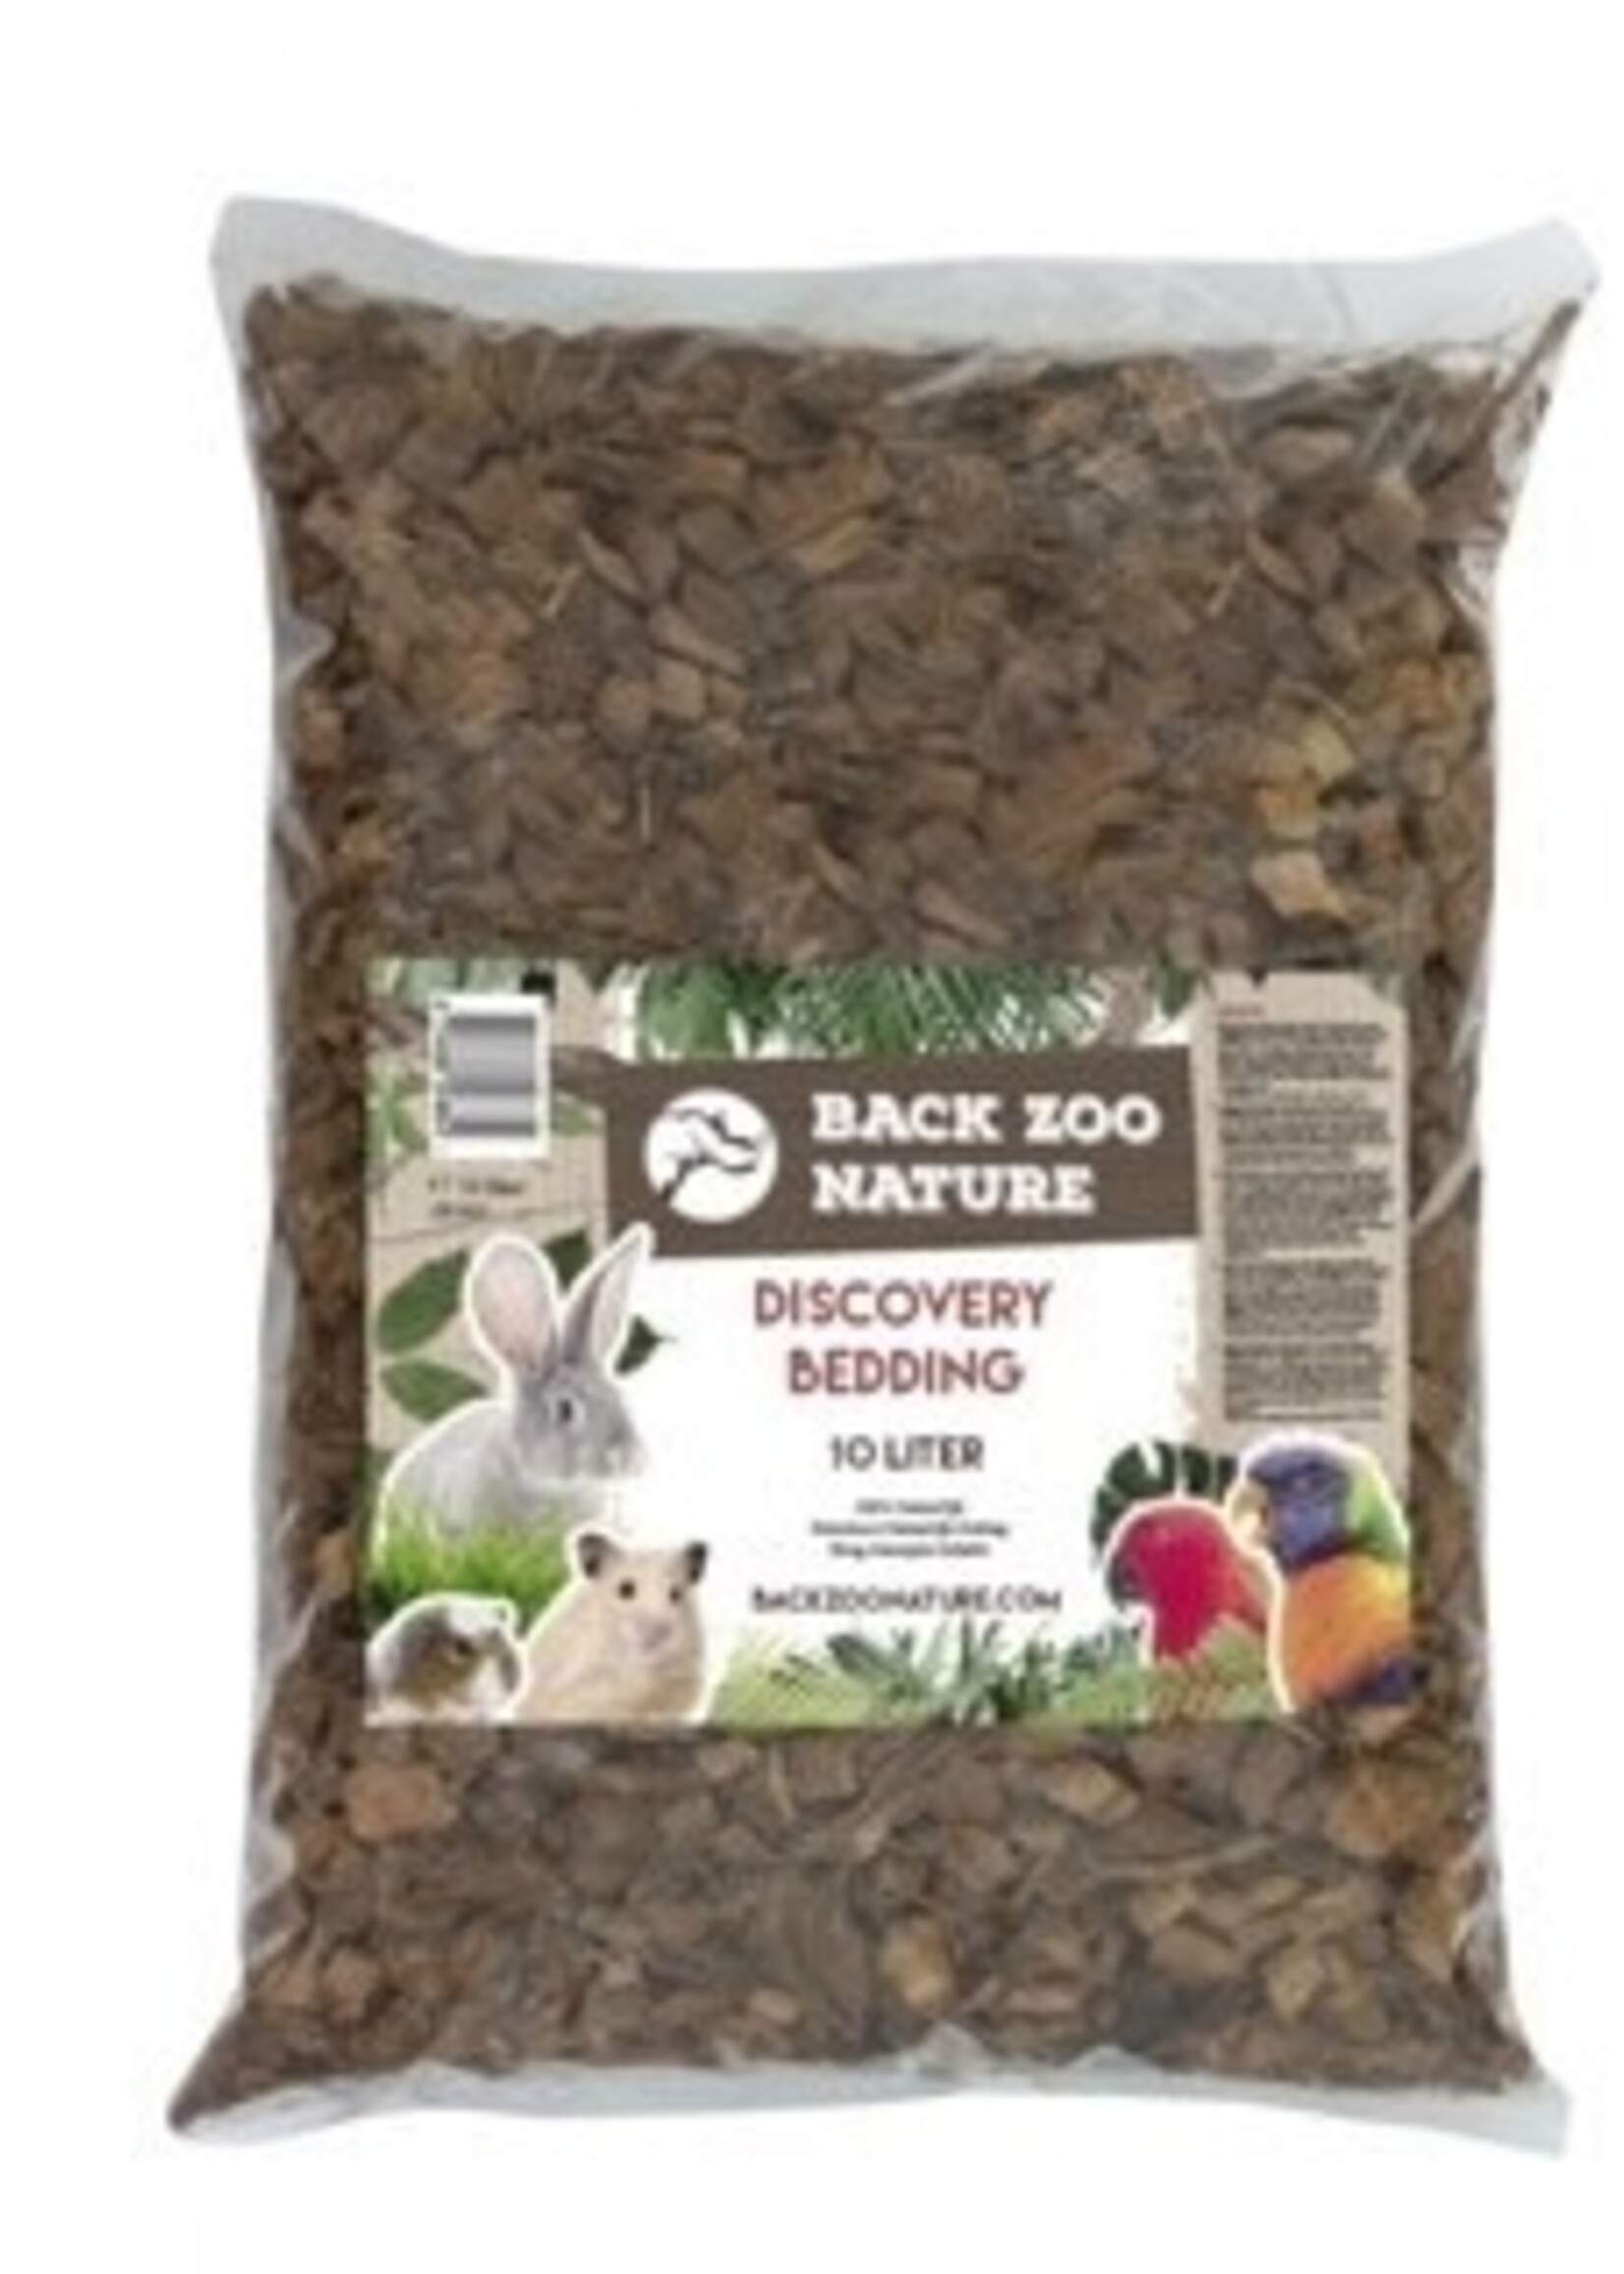 Back Zoo Nature Back Zoo Nature Discovery Bedding 20L